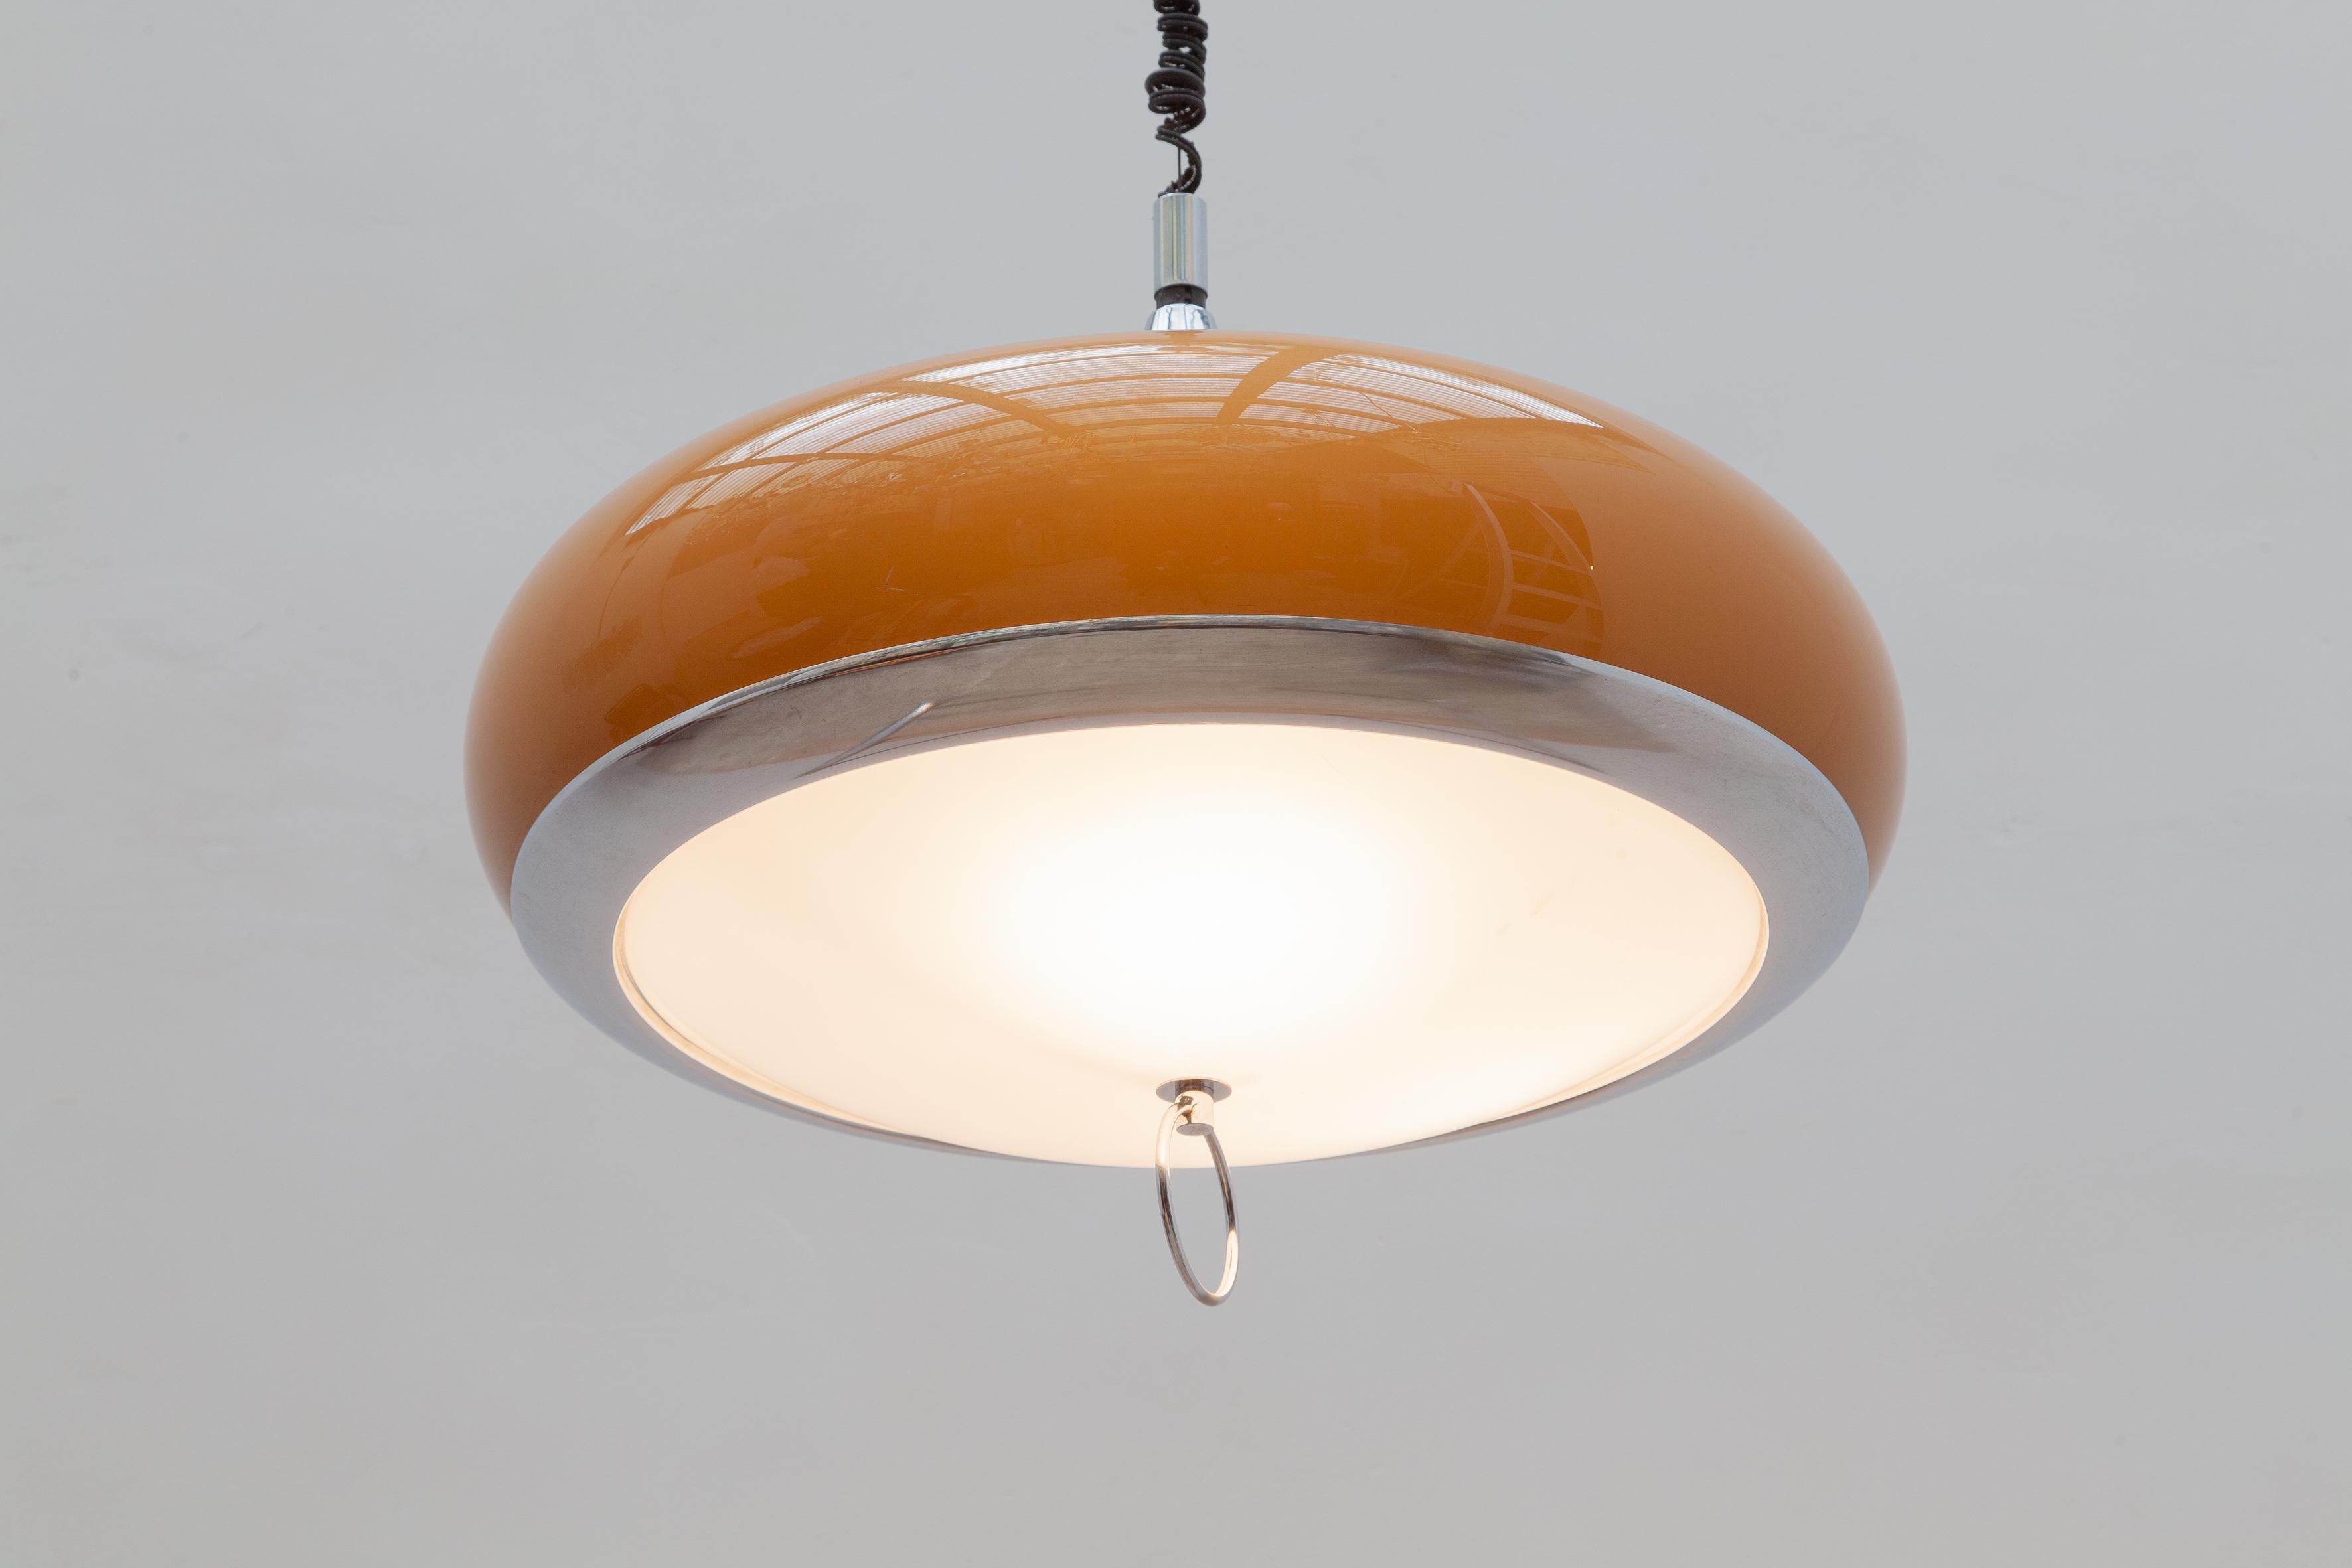 Guzzini pendant lamp. Vintage pendant lamp by Guzzini, Italy. Brown and white Perspex shade with chrome accents. The lamp can be raised and lowered by pulling on the ring.Good condition. Dimensions: Shade: 60 W x 60 H x 60 D cm. Cord drop height: